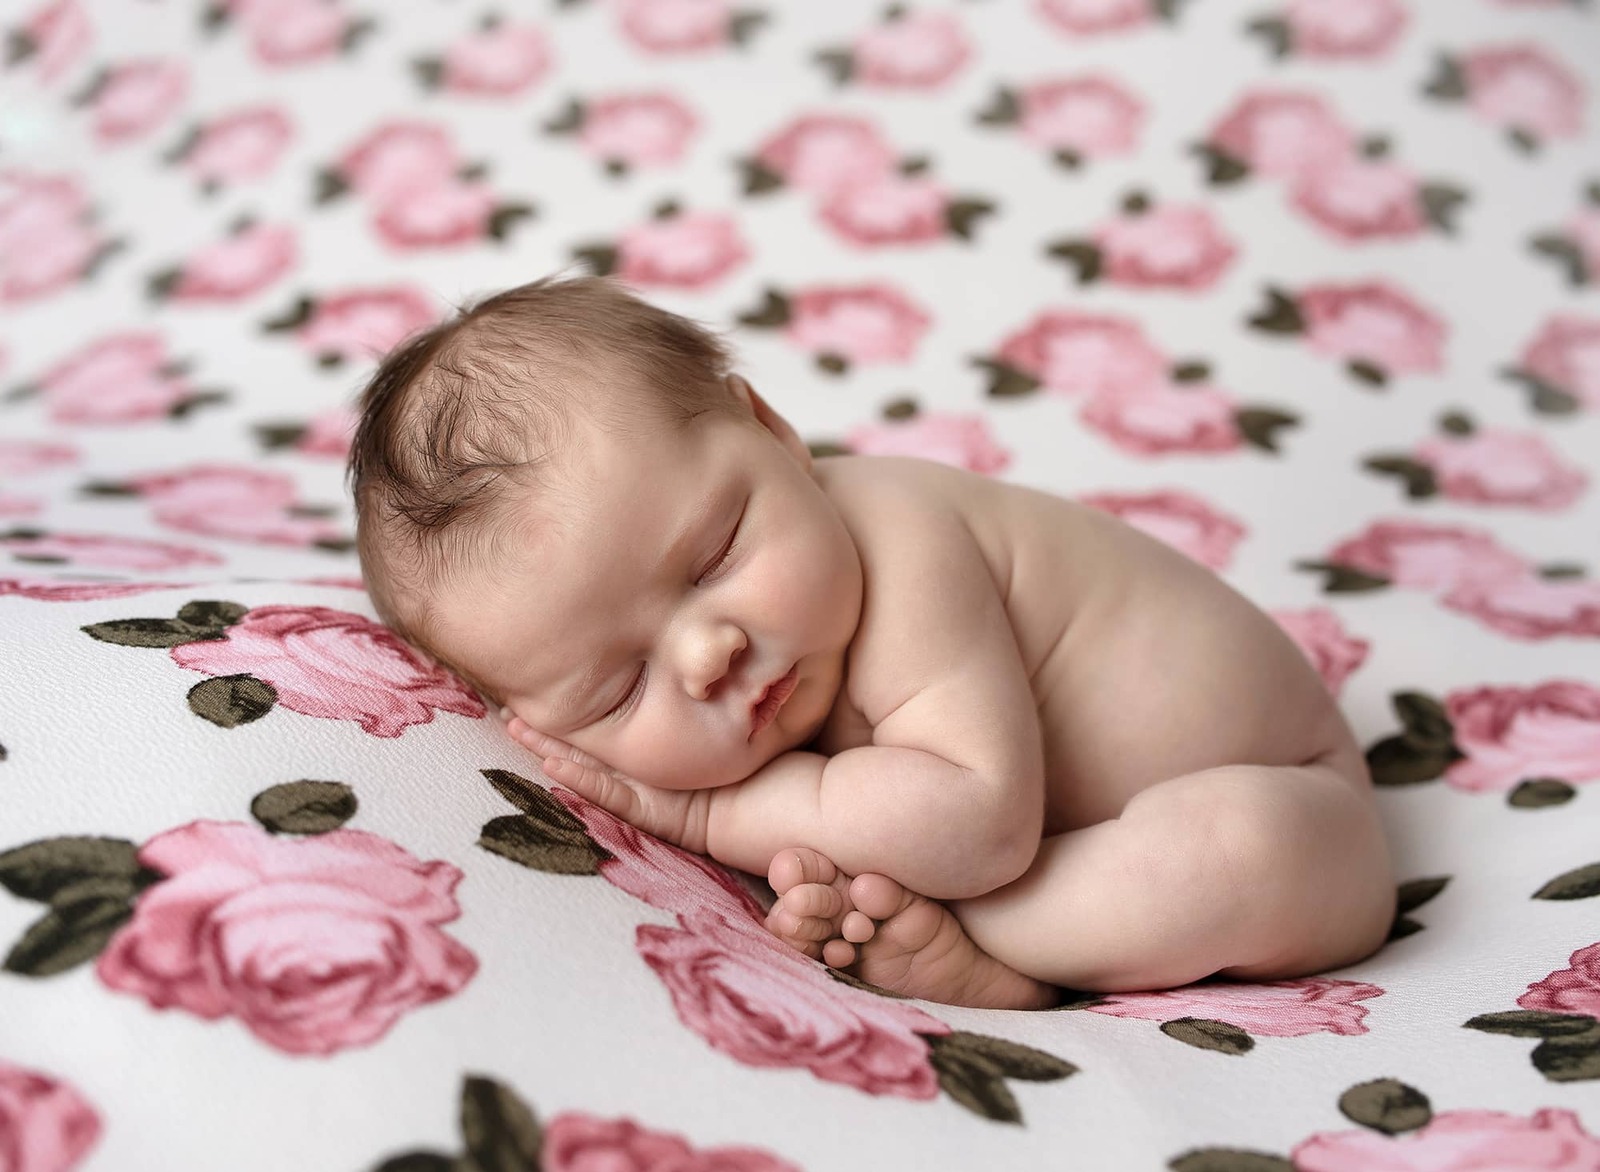 Baby girl newborn portrait on a floral backdrop in the studio in Avon Lake, OH.